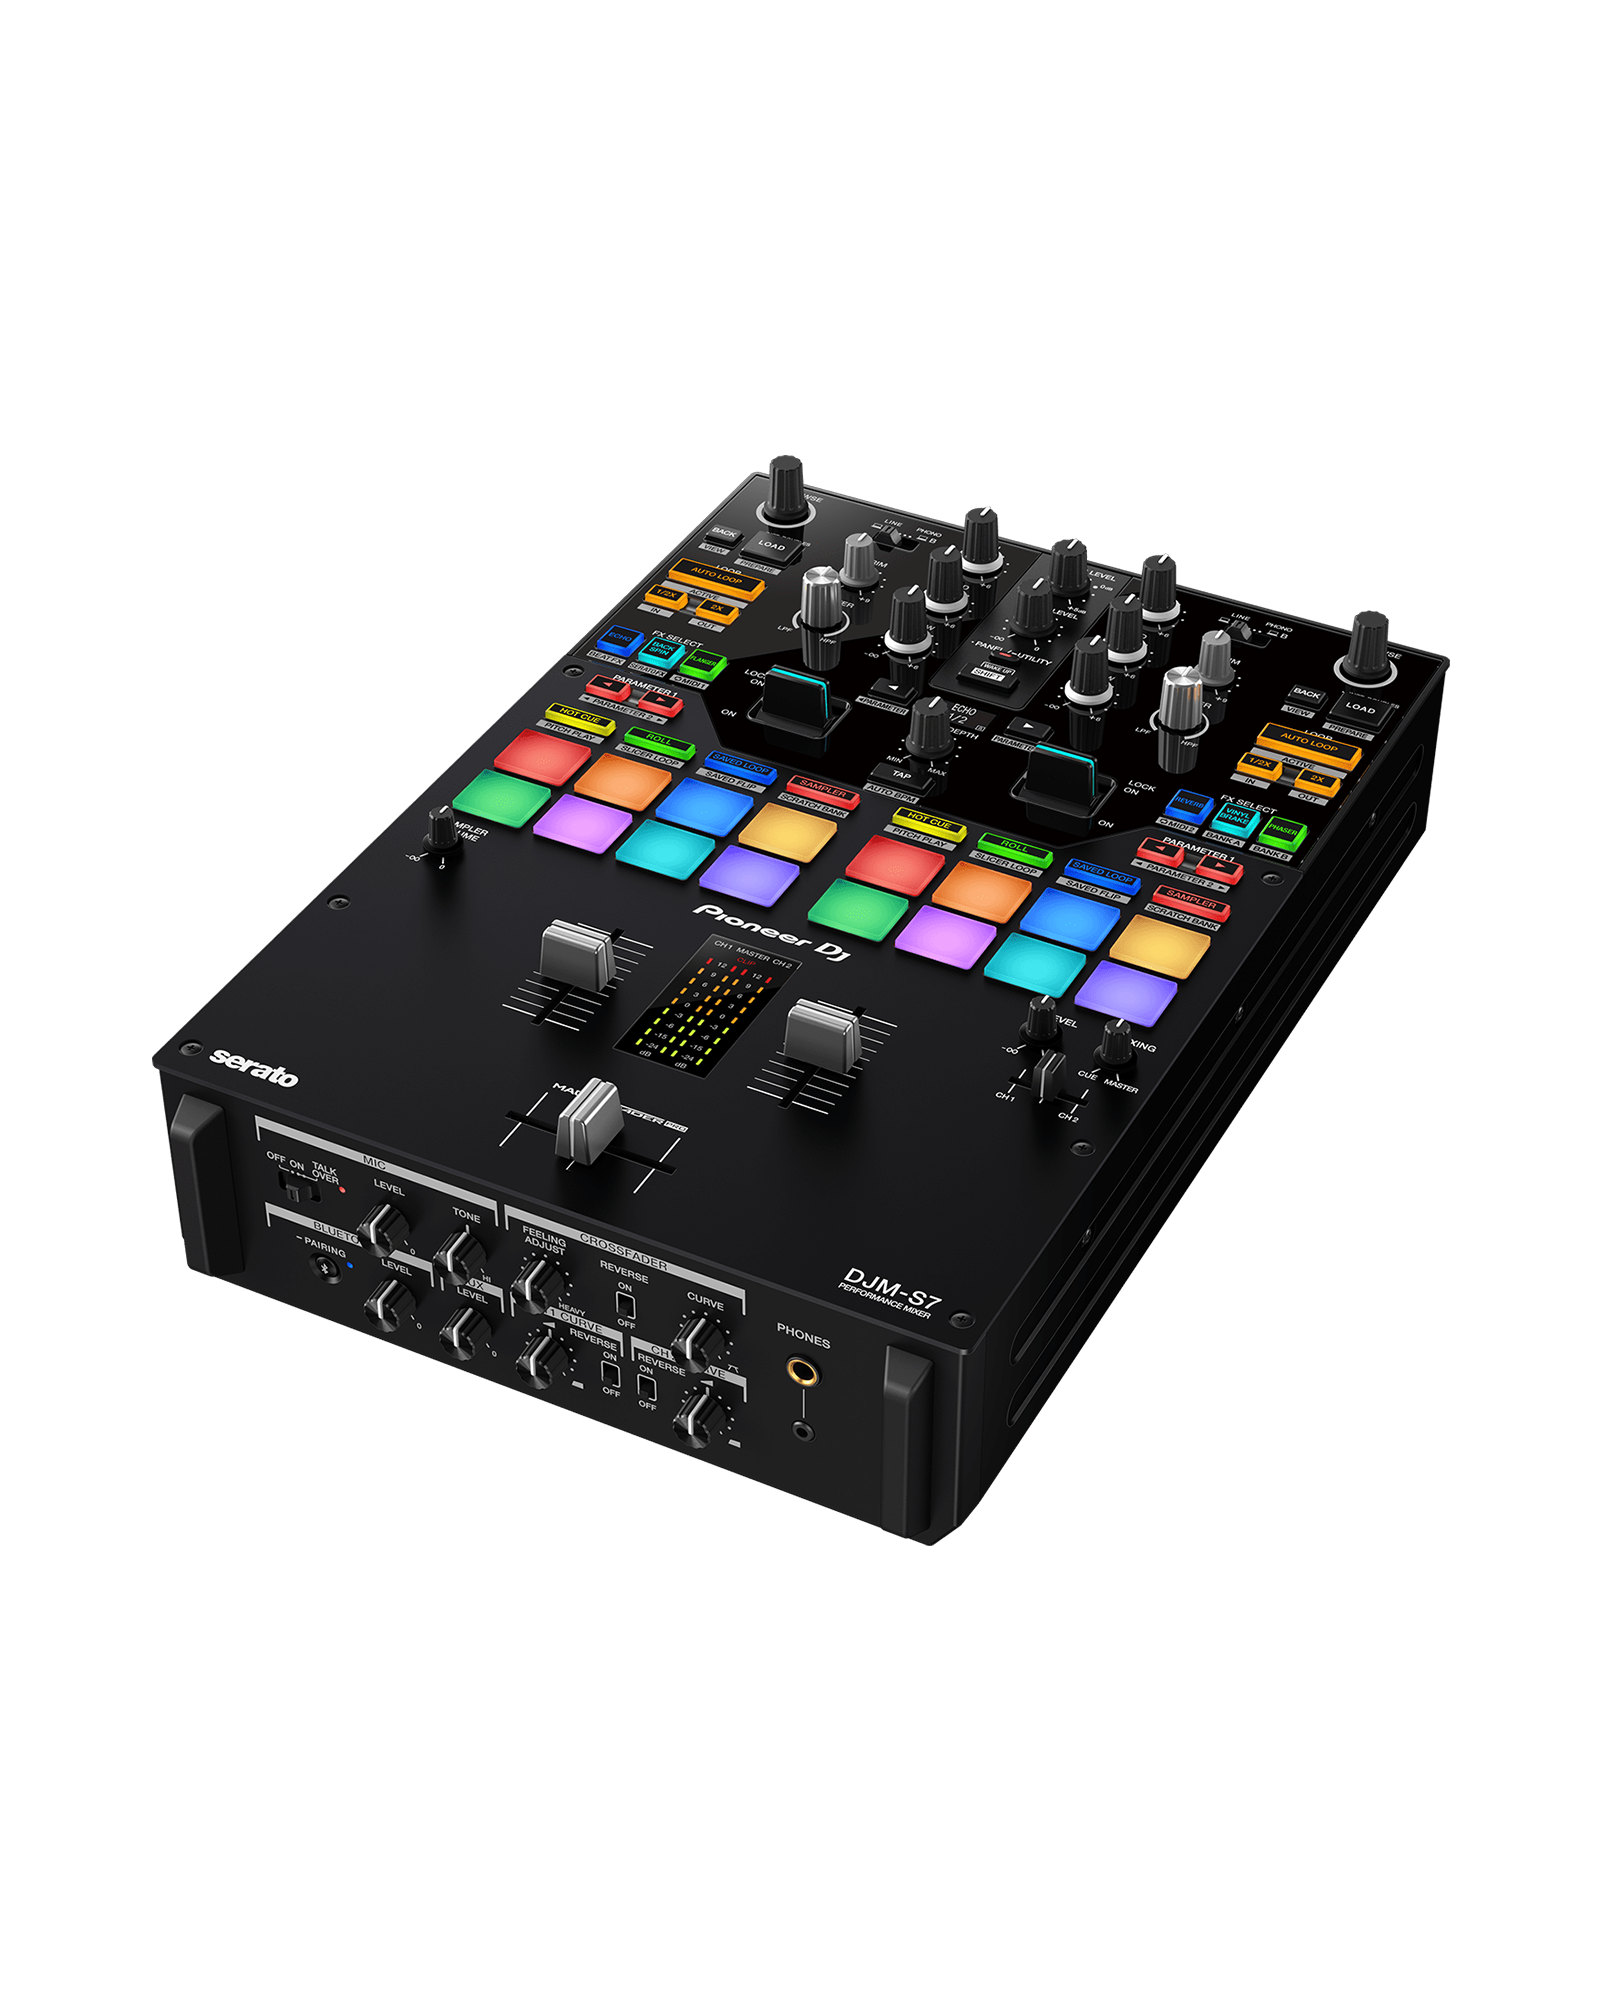 pioneer DJM-S7 mixer top rifht front angle